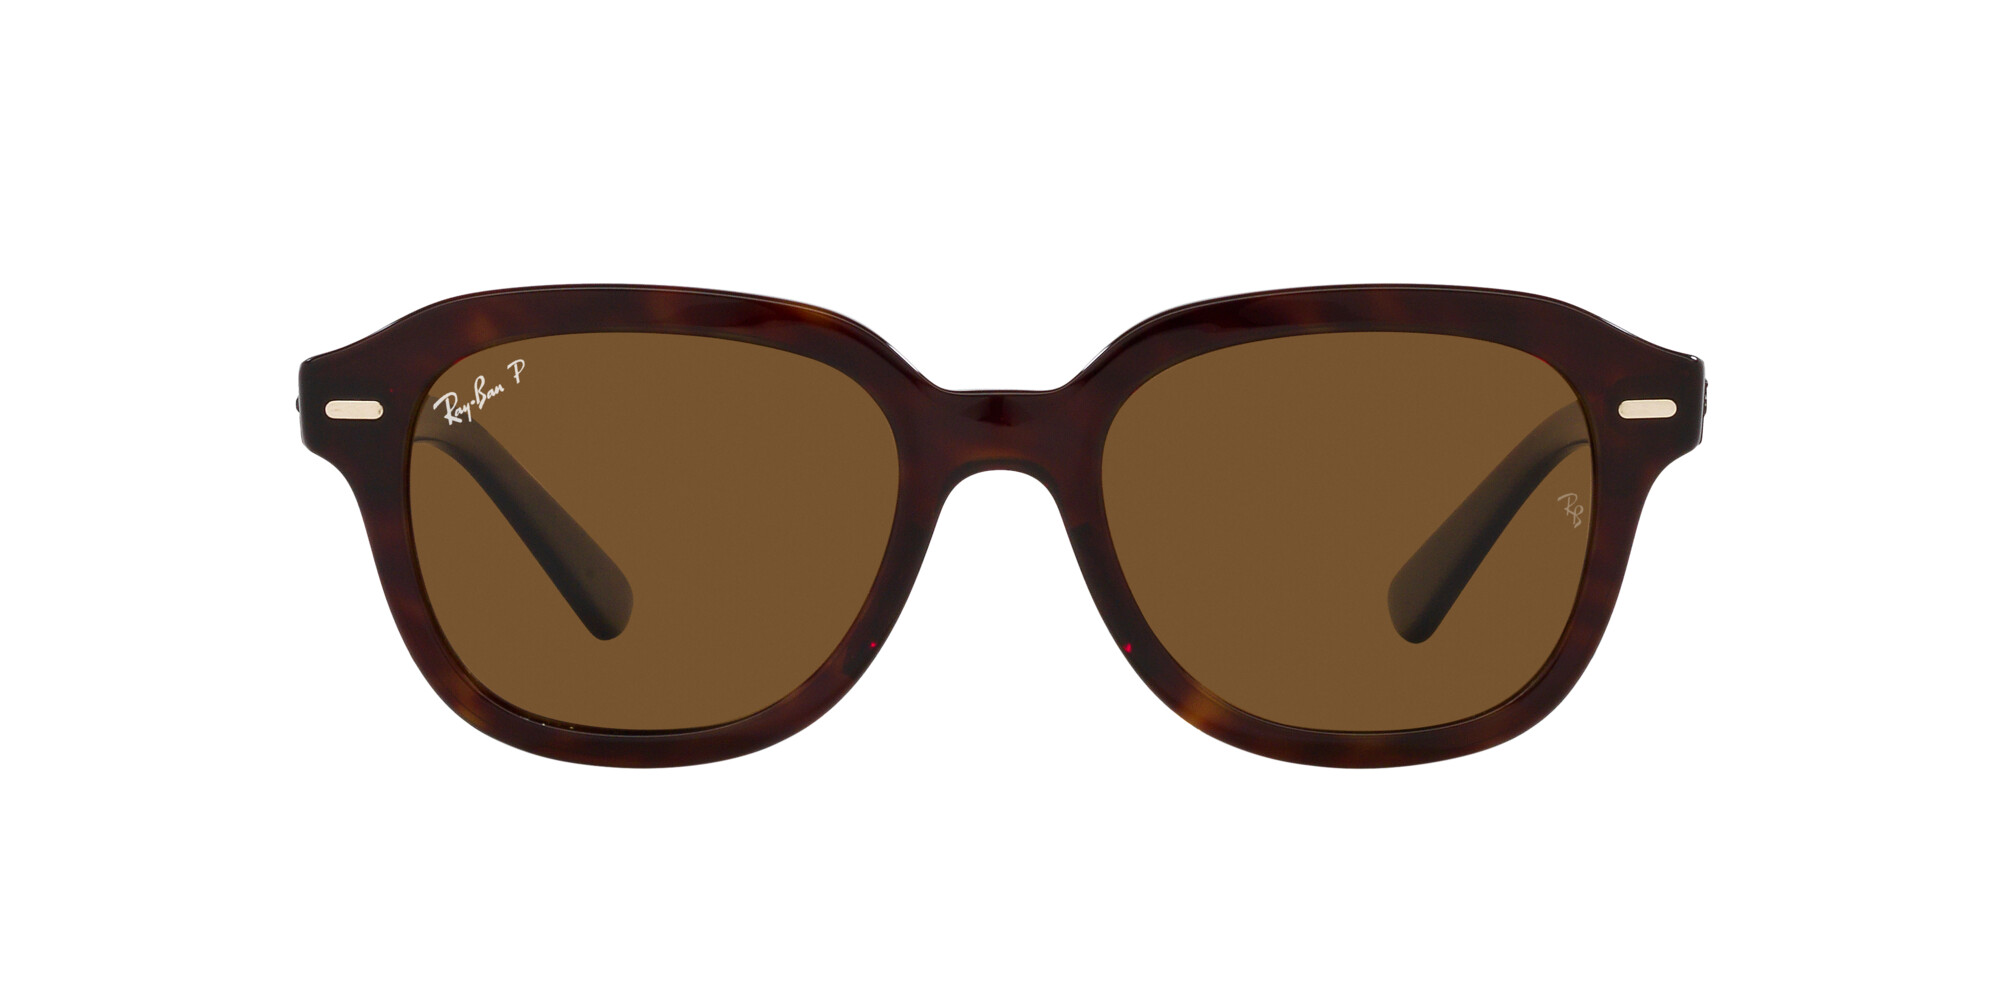 [products.image.front] Ray-Ban ERIK 0RB4398 902/57 Sonnenbrille